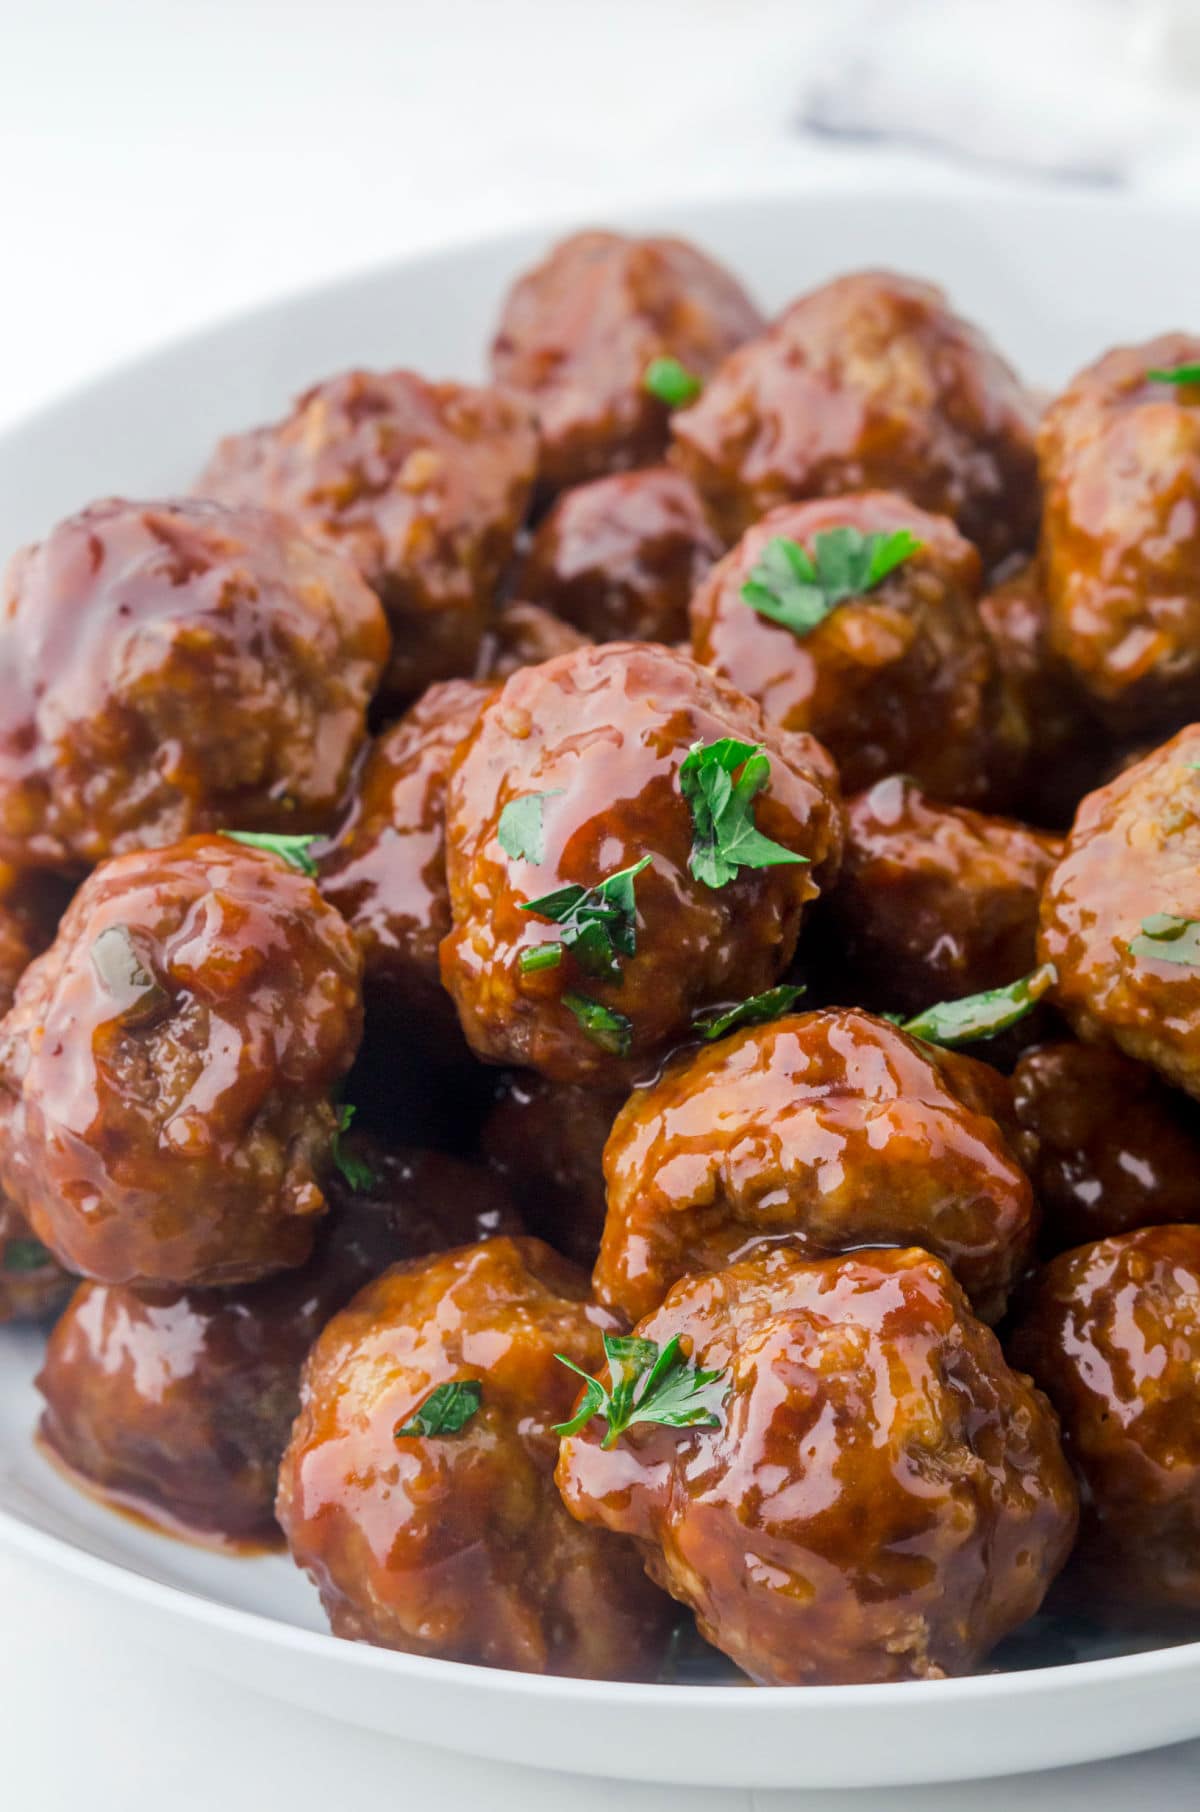 Closeup view of glazed meatballs in a serving bowl.